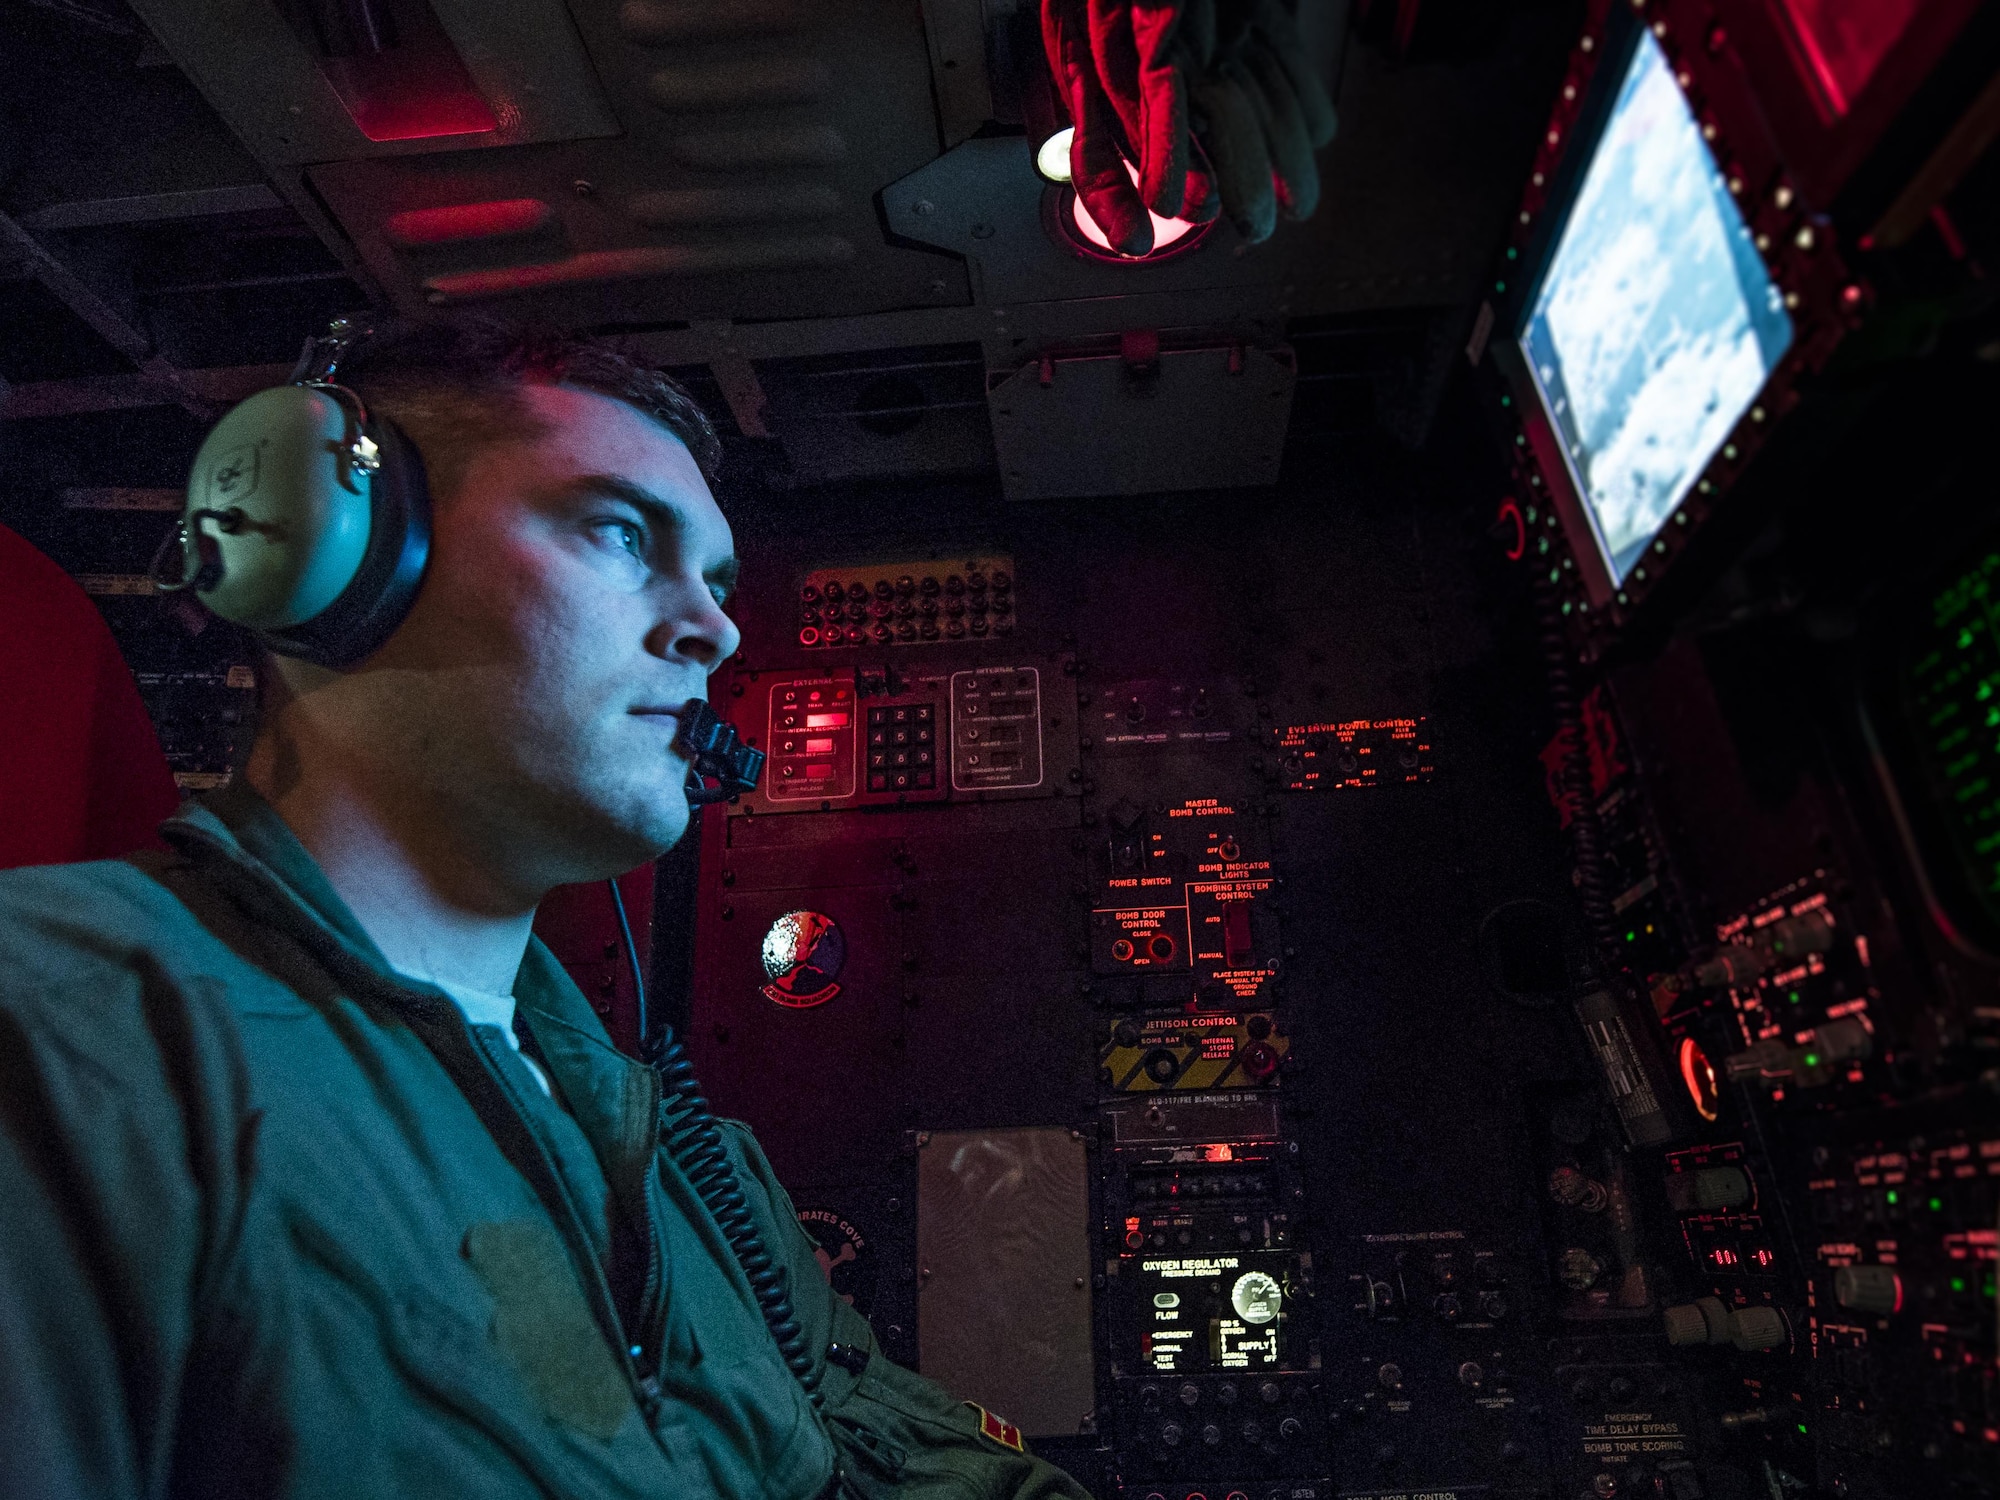 1st Lt. Alex Johnson, 23rd Bomb Squadron weapons system officer, analyses a multi-function color display inside a B-52H Stratofortress above North Dakota, Jan. 31, 2017. Johnson along with another weapons system officer, sit in the offense compartment of the aircraft, controlling the B-52’s weapons capabilities. (U.S. Air Force photo/Senior Airman J.T. Armstrong)